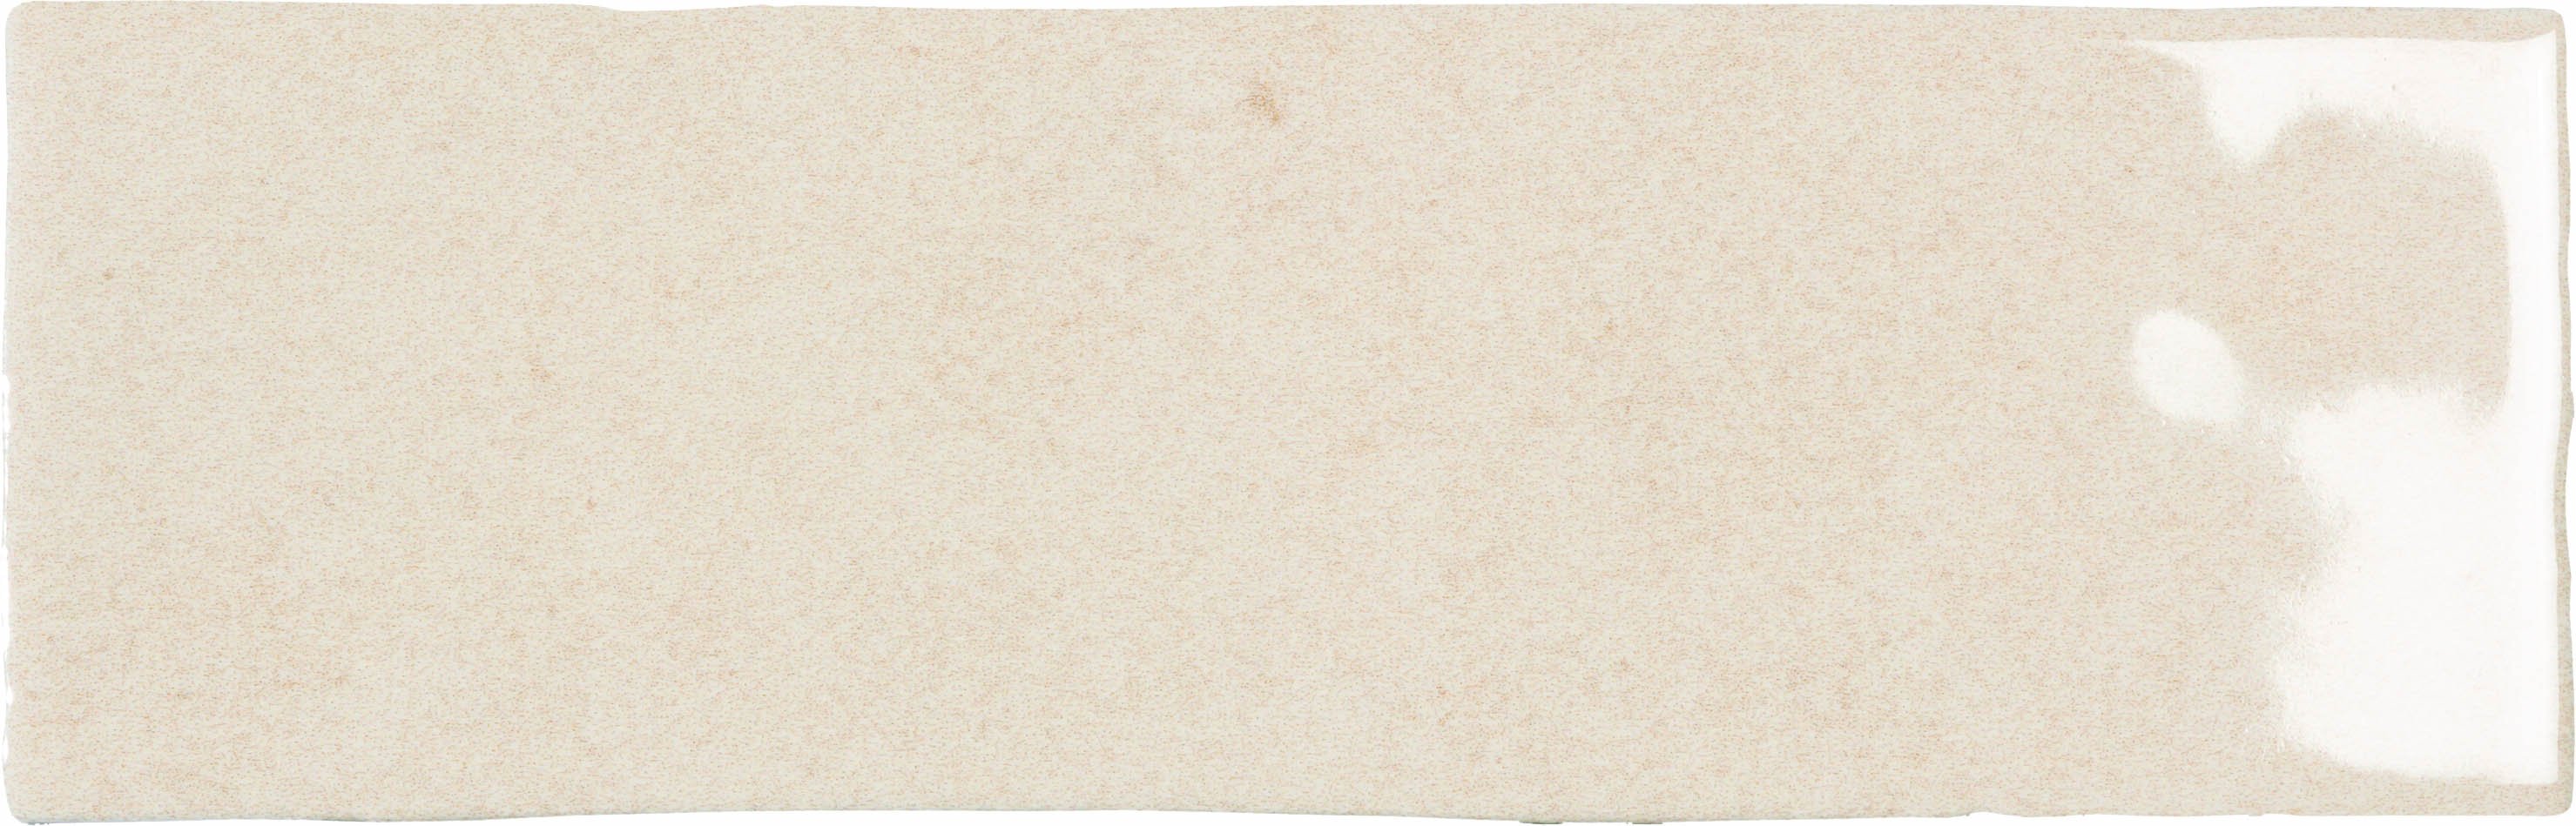 Emser PASSION CREMA 3X8 wall tile glazed porcelain tile is available in both subway tile 3x8 and square tile 9x9.  Emser Tile Passion tile comes in Verde, Azul, Rosa, Gris, Crema, Blanco, and Nero.   Emser Tile Passion tile is high qualit